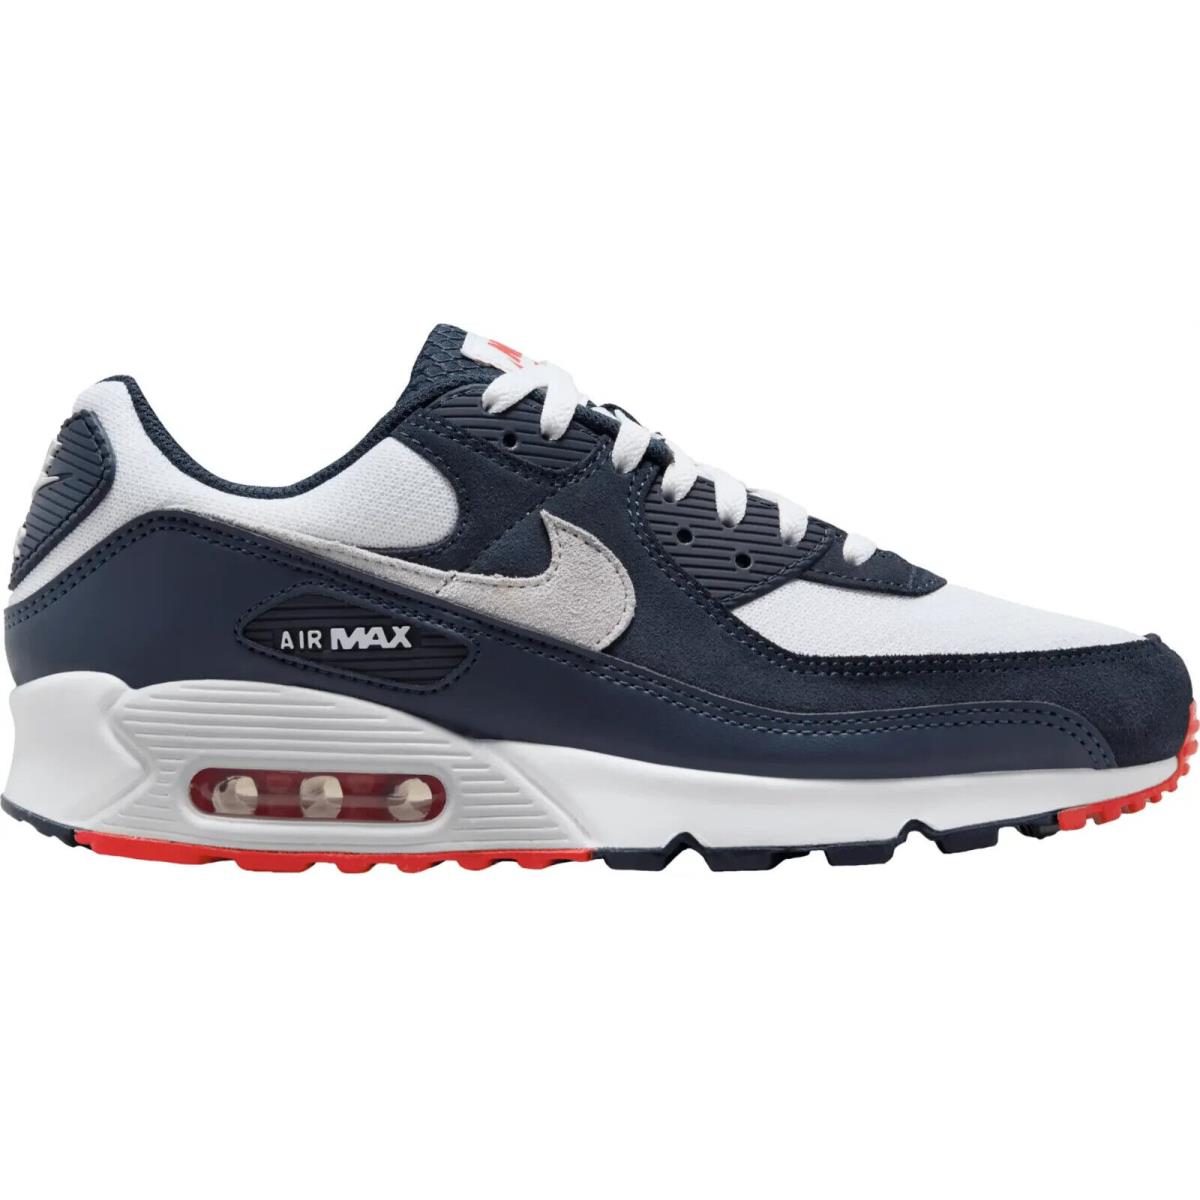 Nike Air Max 90 Men`s Casual Shoes All Colors US Sizes 7-14 Bestseller Obsidian/Pure Platinum/White/Track Red